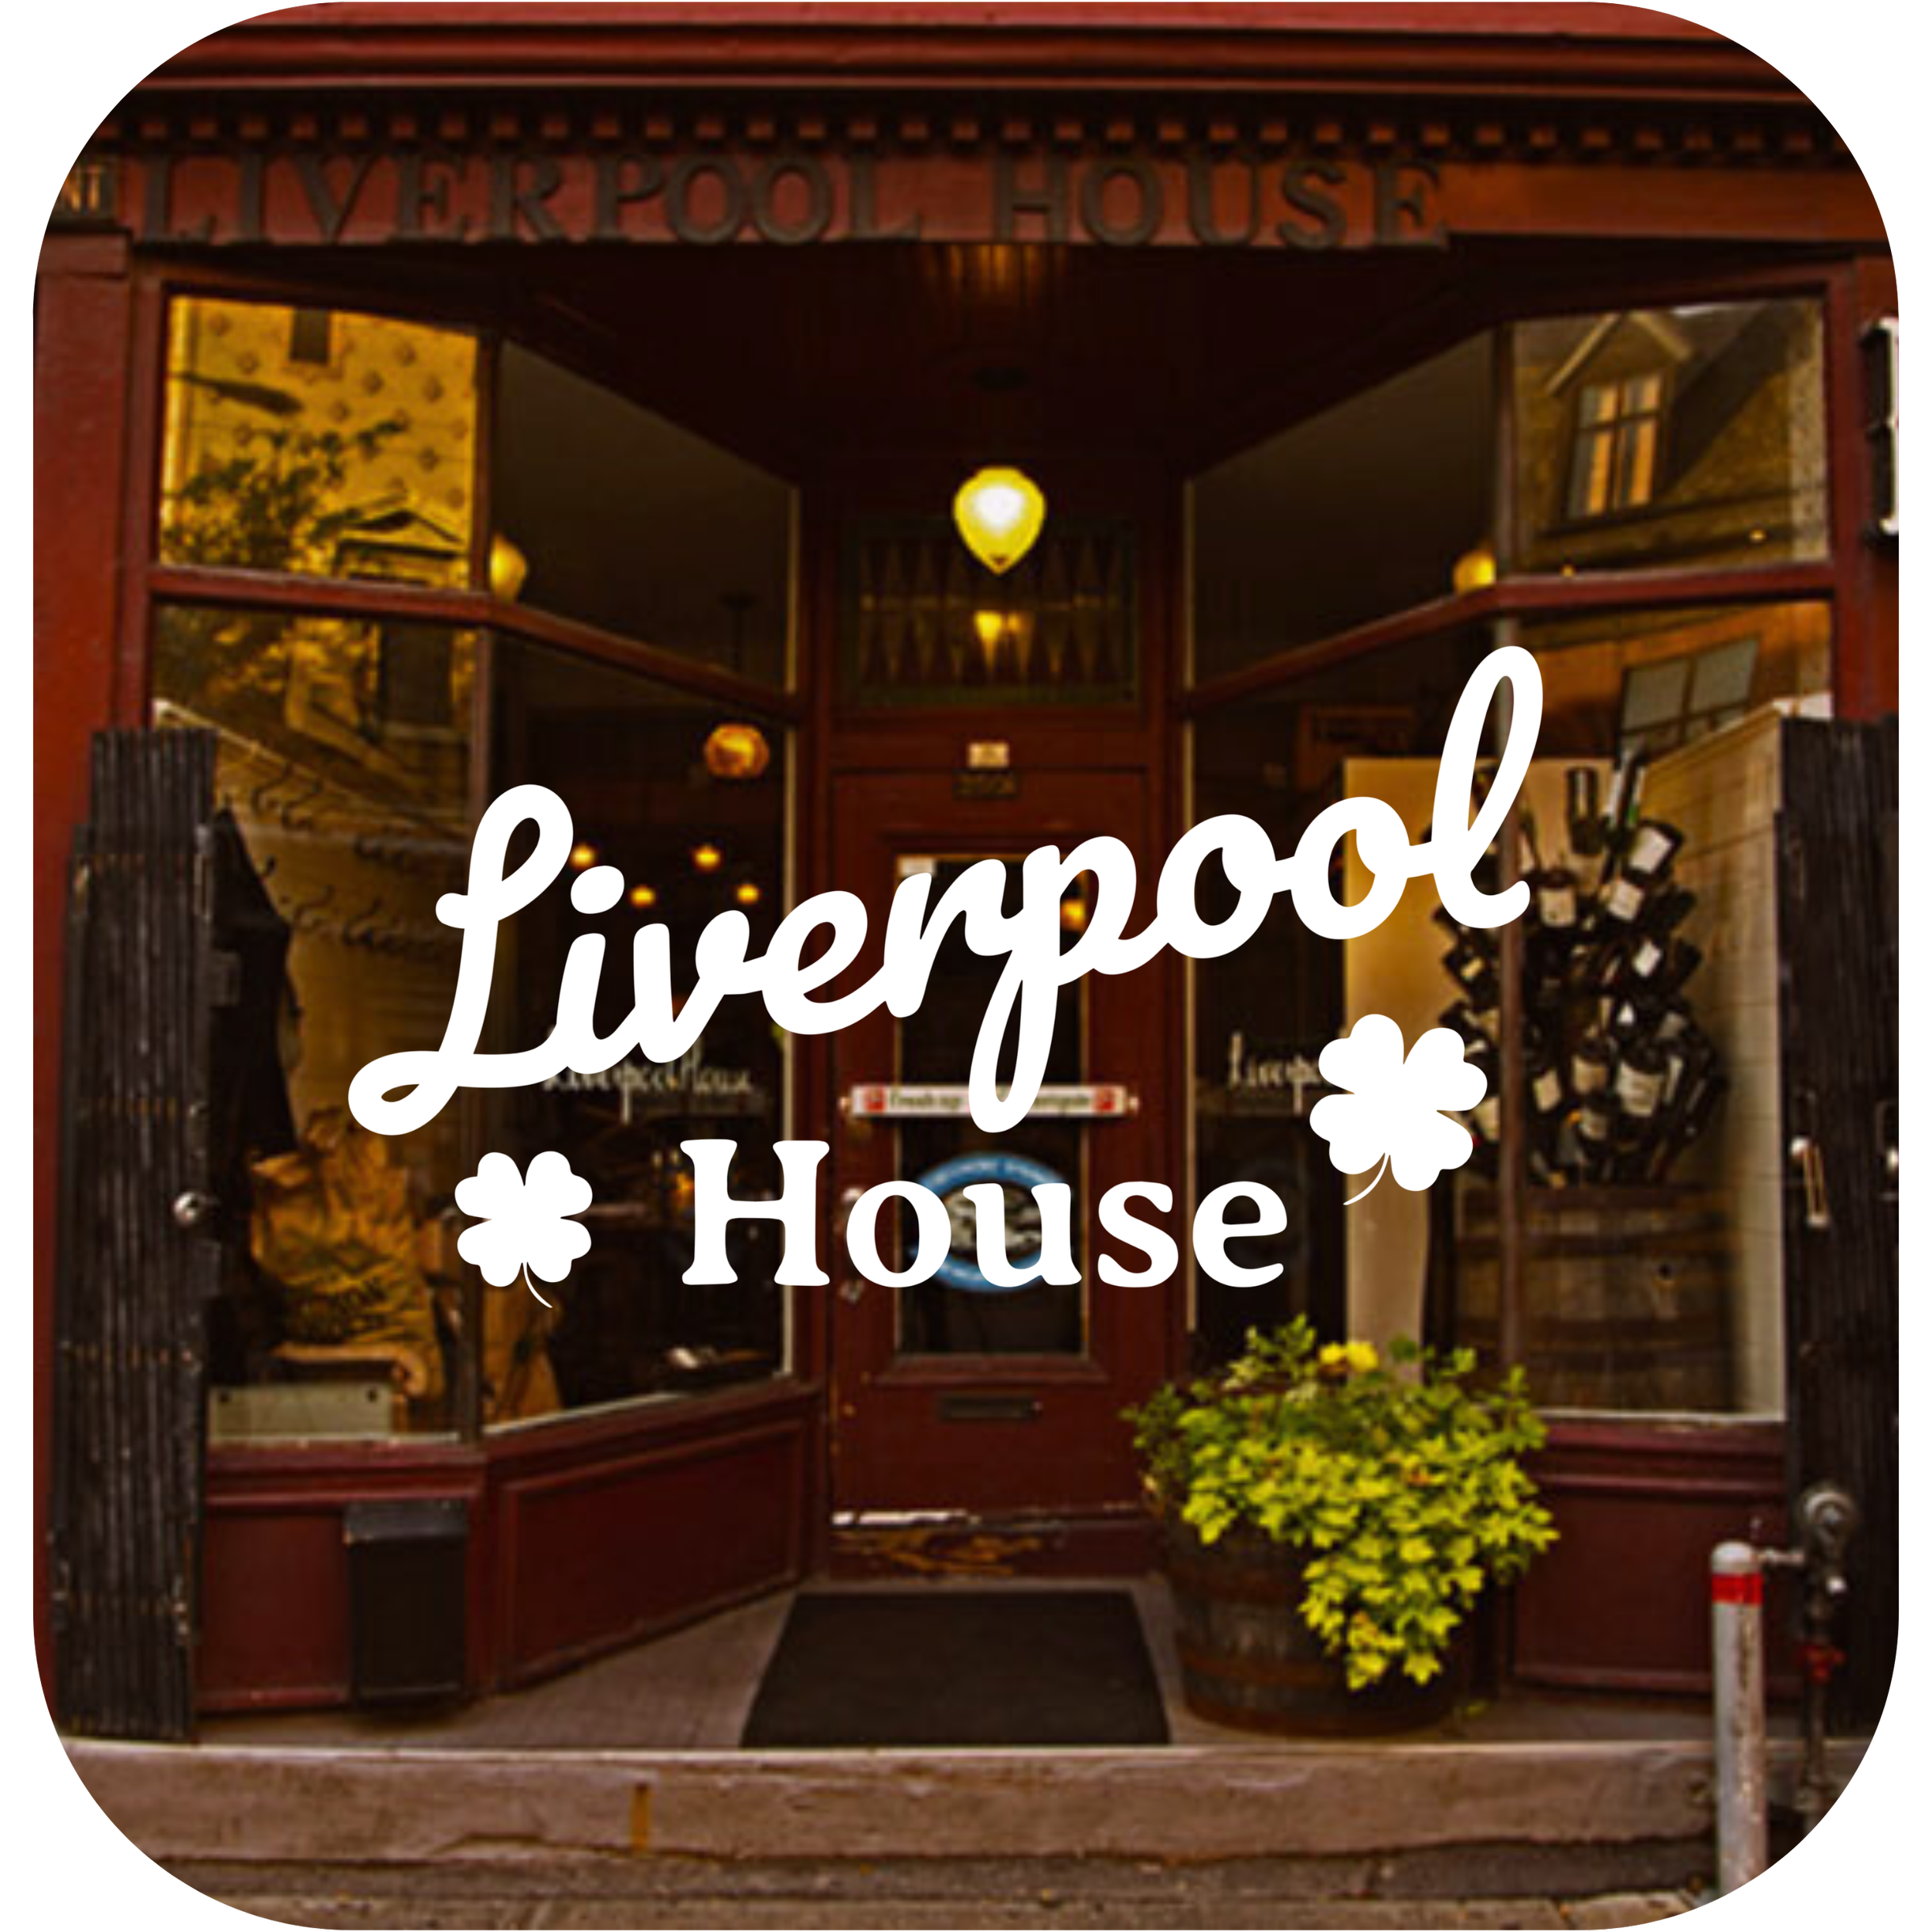 Liverpool House.png